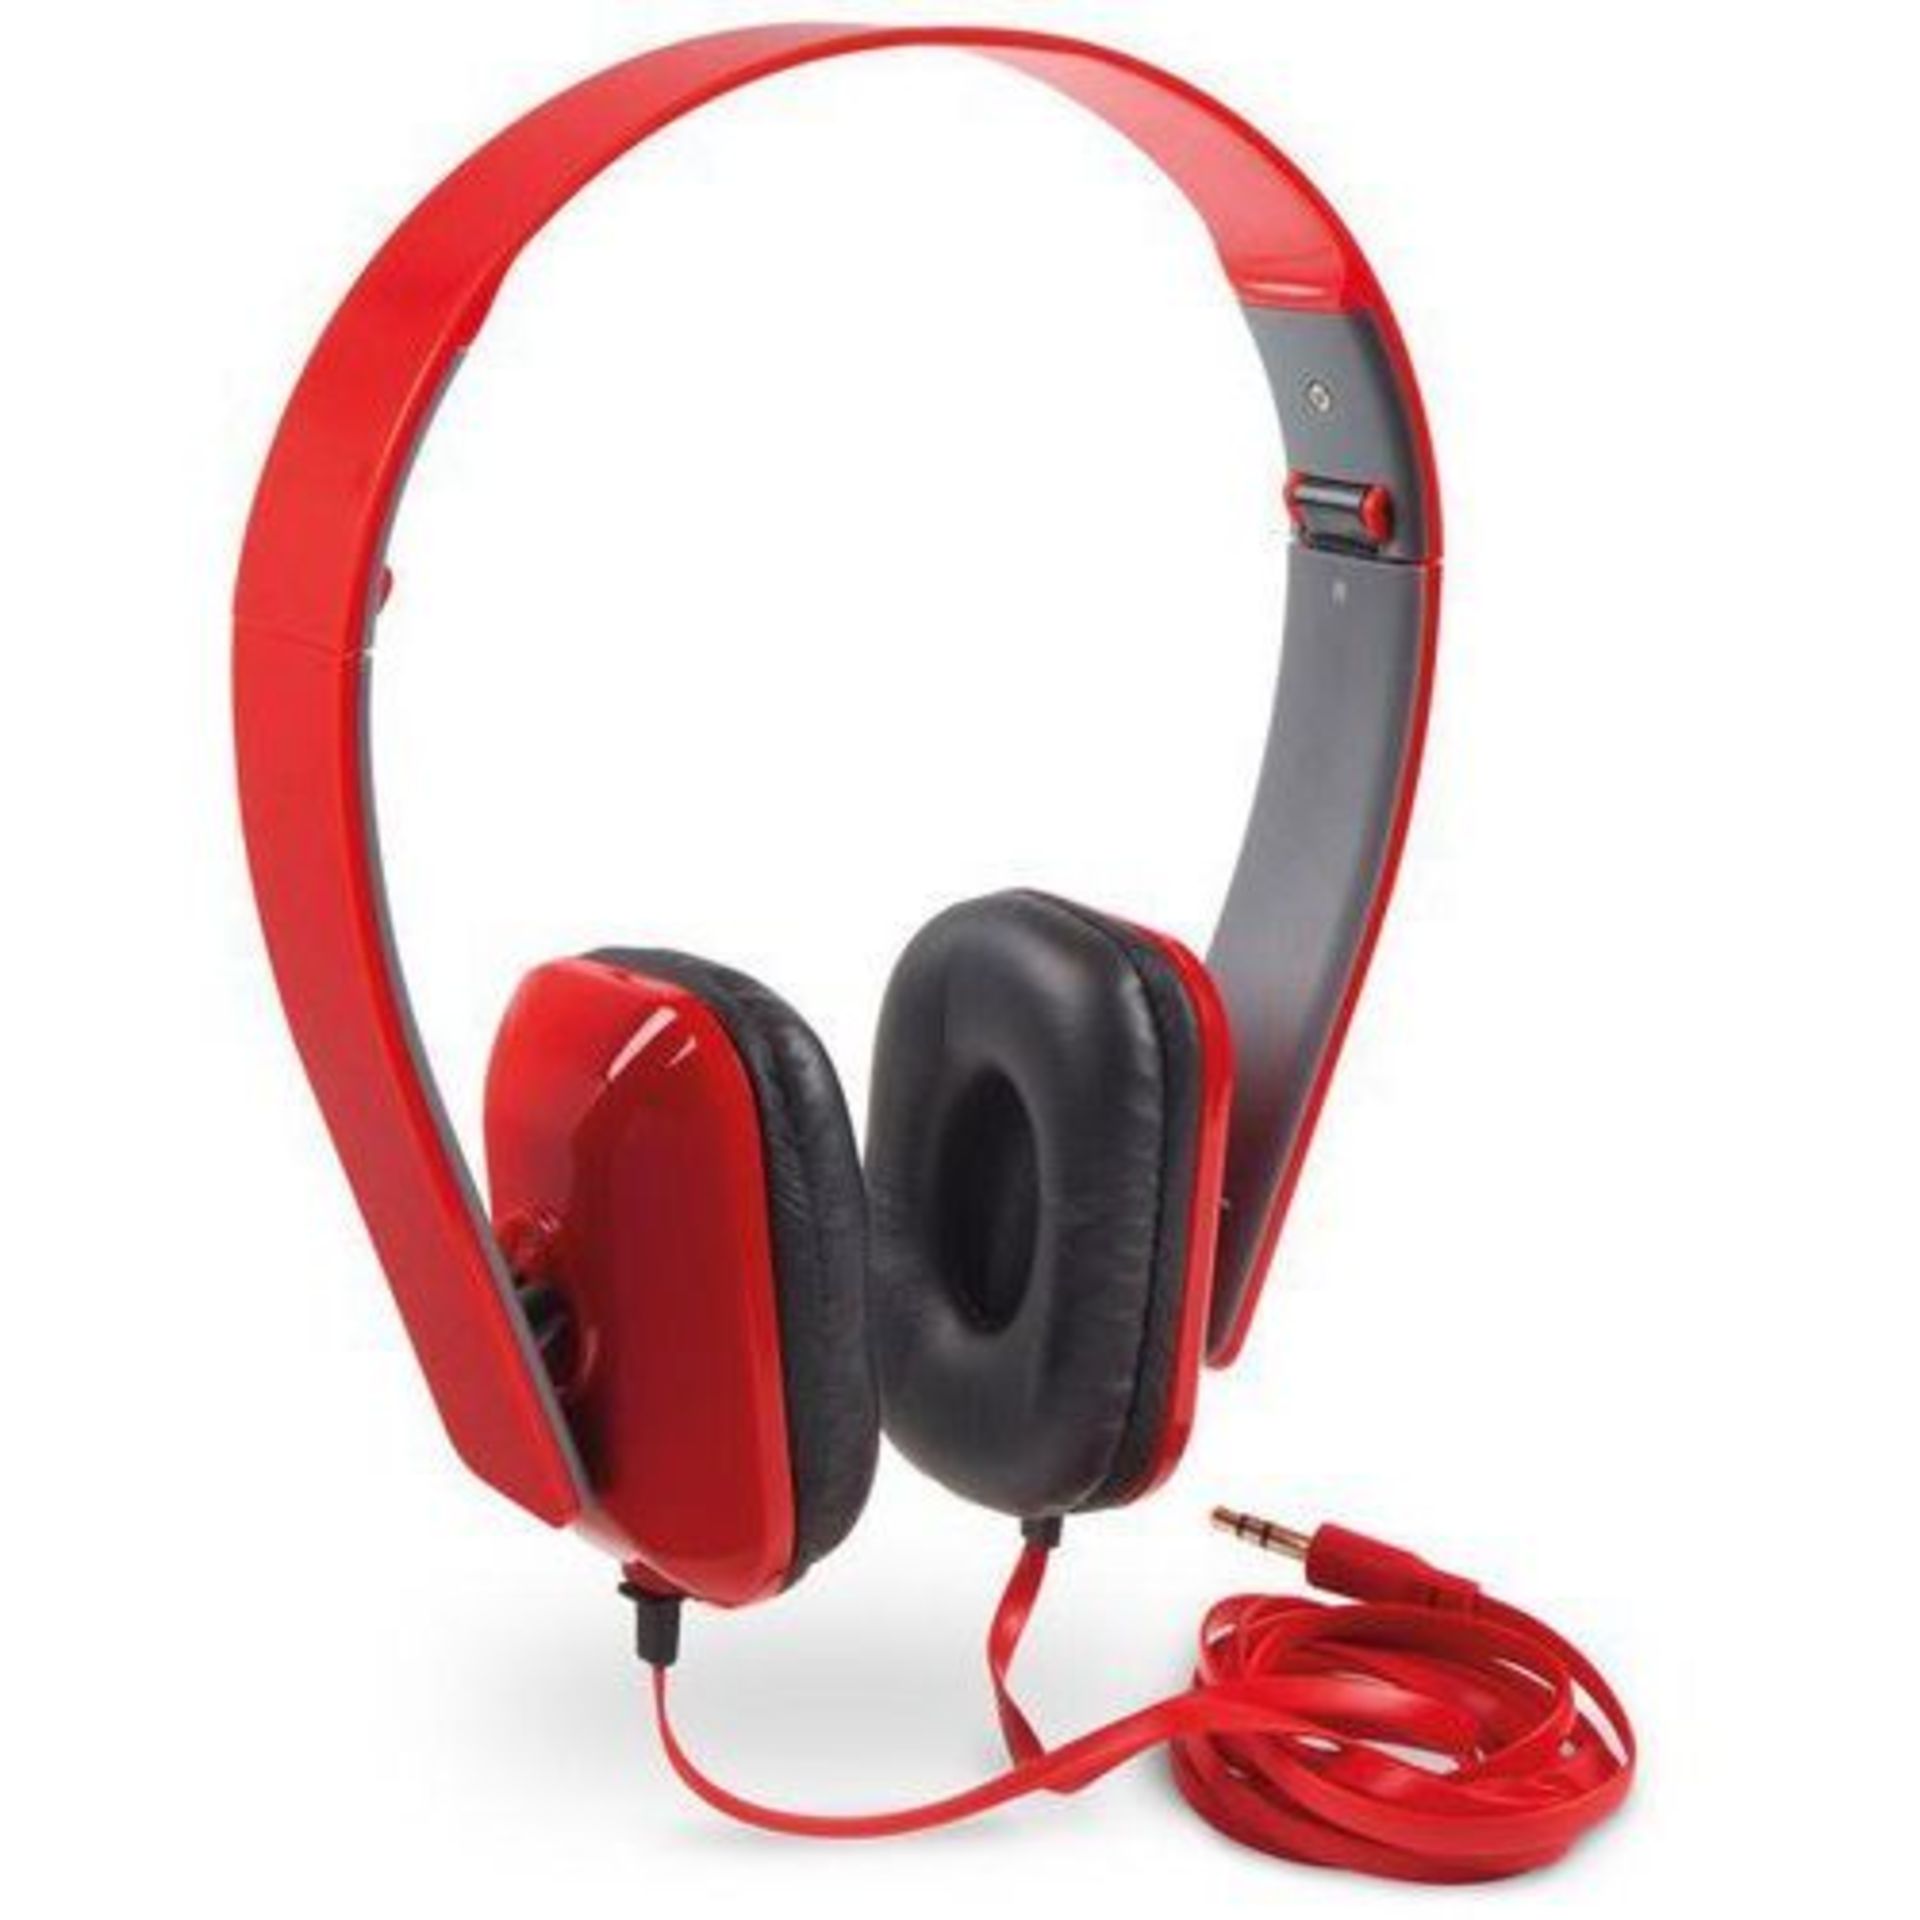 V *TRADE QTY* Brand New Targus Carry & Listen Headphones X240 YOUR BID PRICE TO BE MULTIPLIED BY TWO